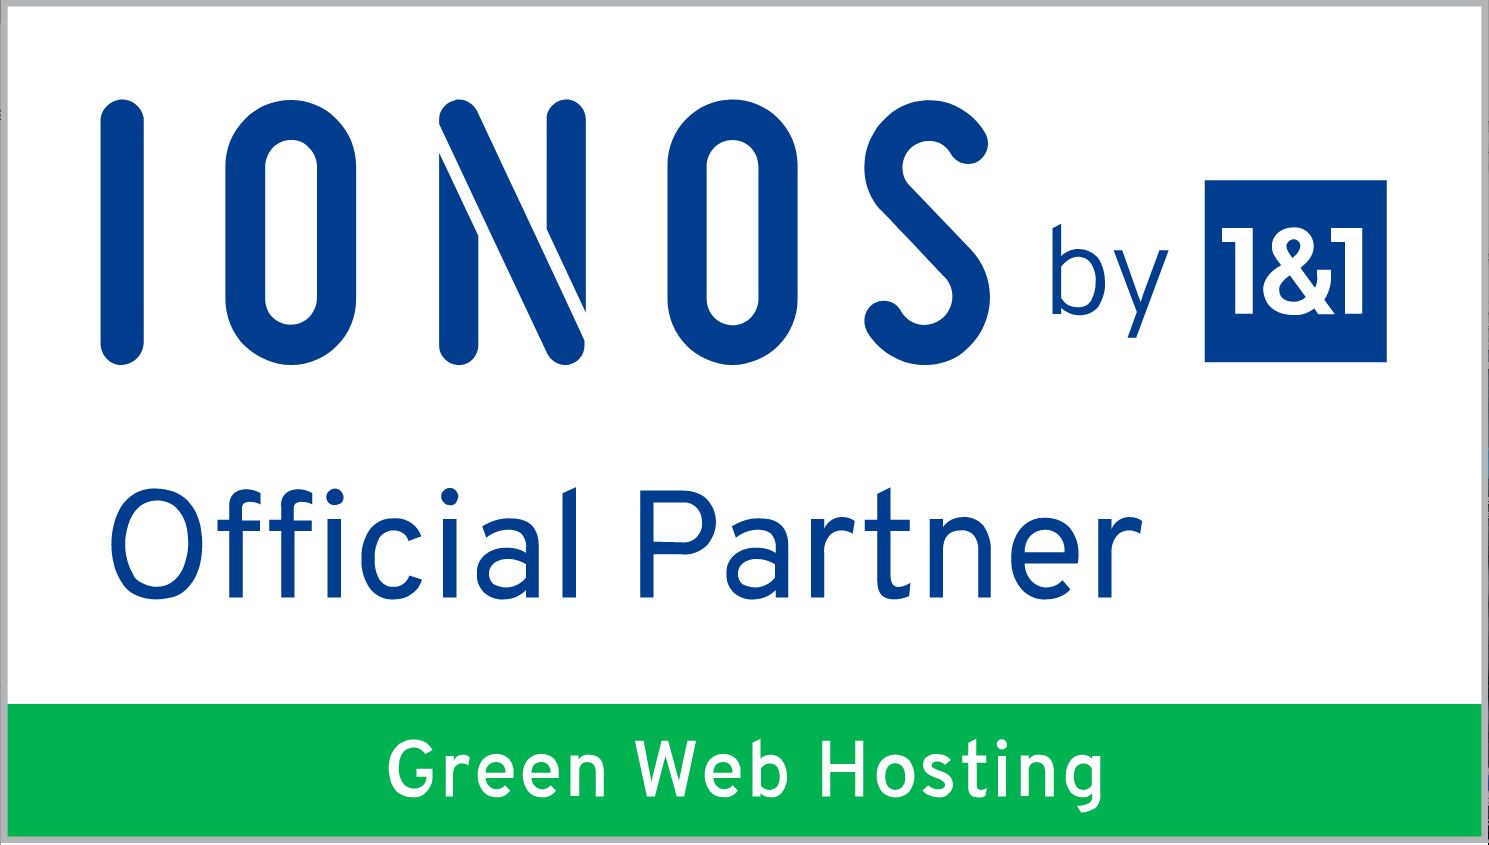 IONOS by 1&1 Partner